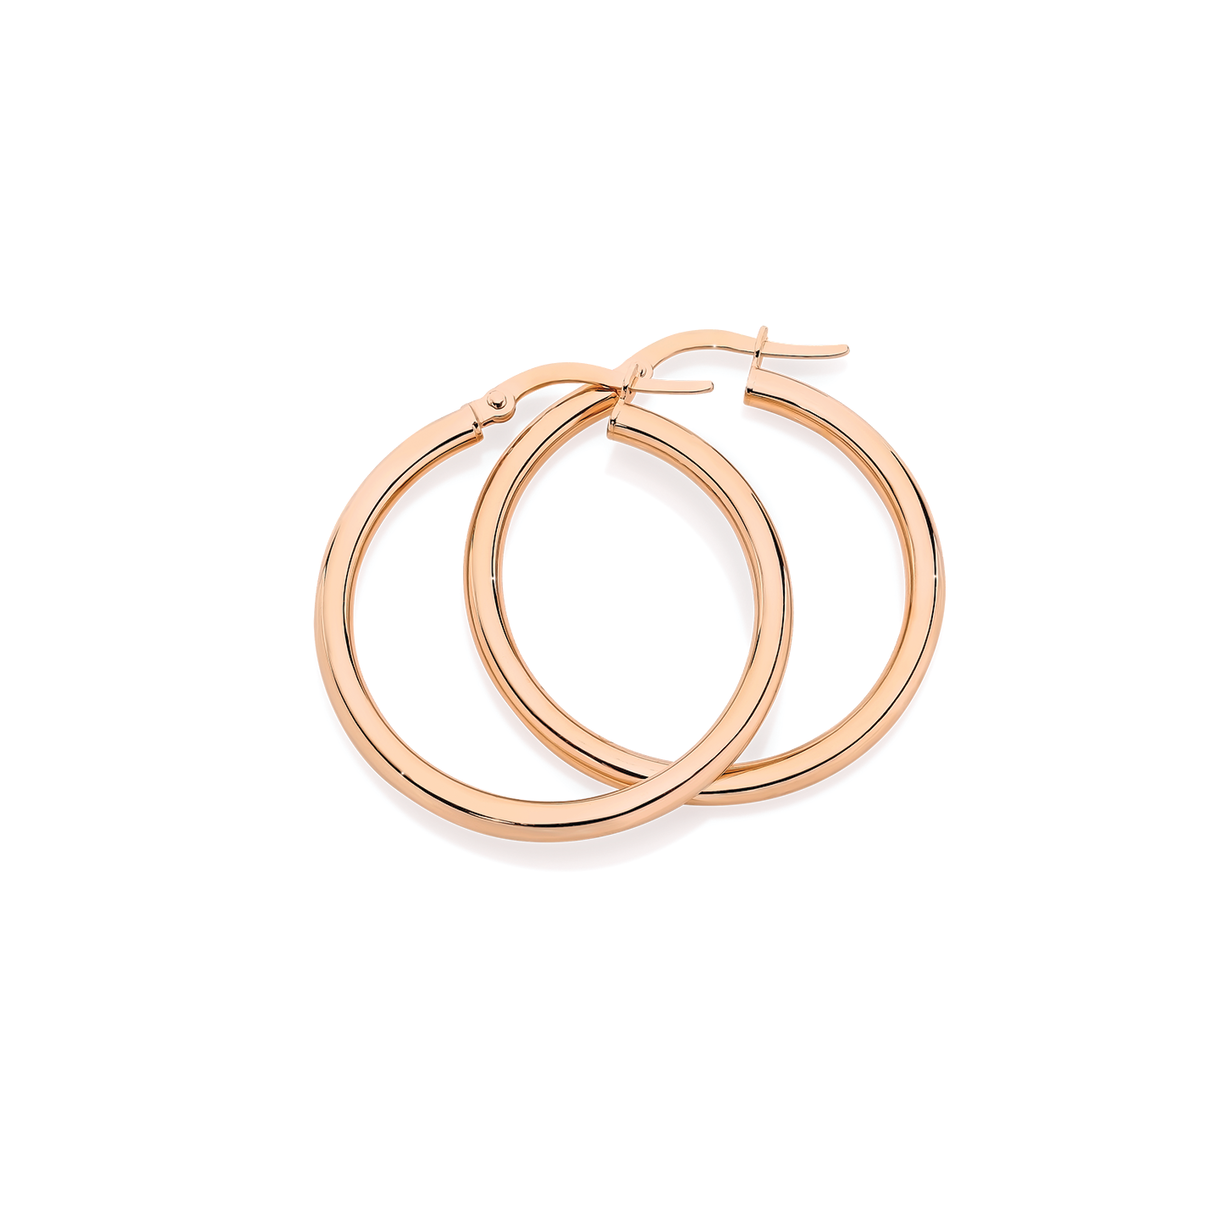 9ct Rose Gold 2.5x25mm Polished Hoop Earrings | Earrings | Angus and Coote